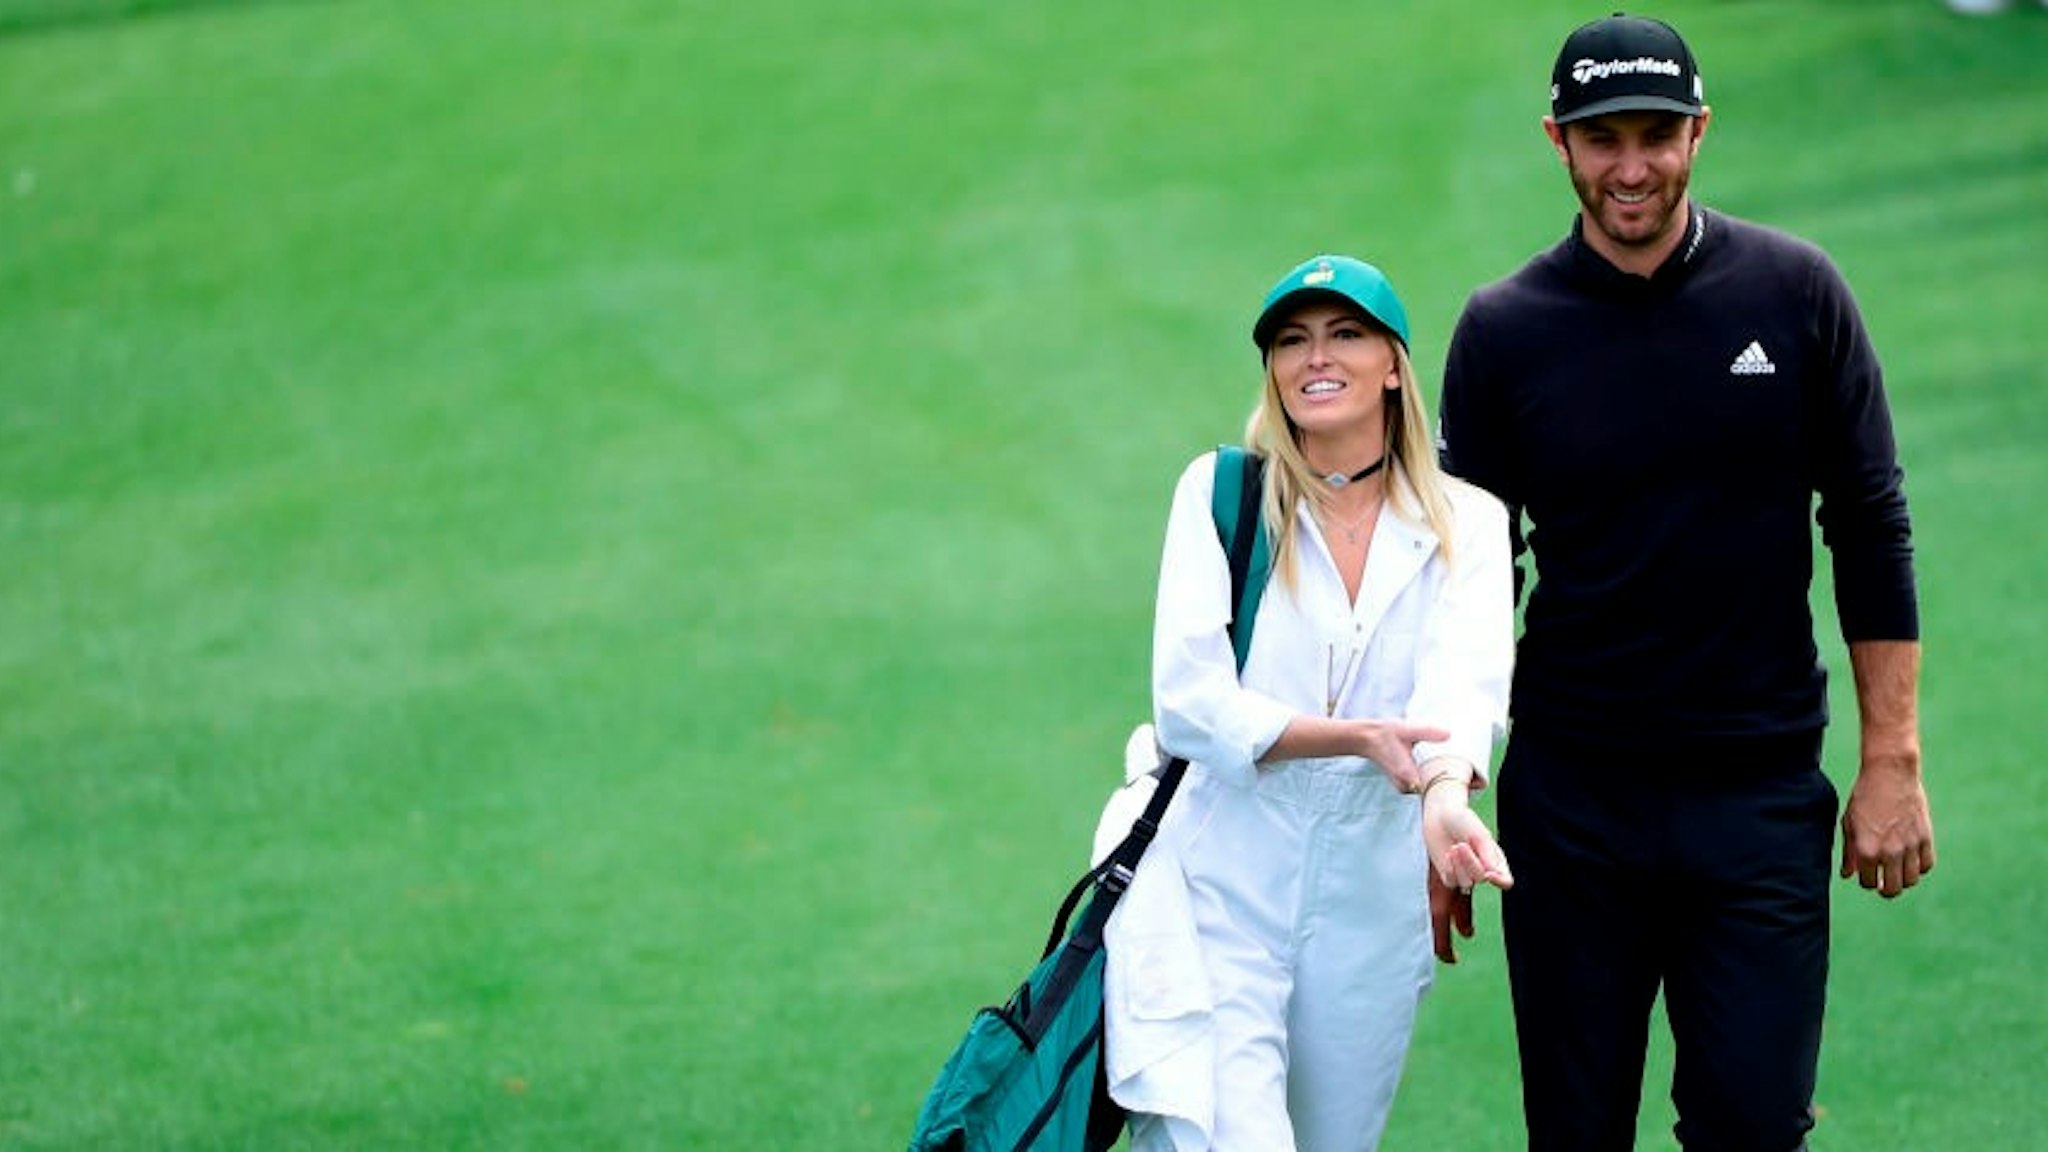 Dustin Johnson and his wife Paulina Gretzky walk up No. 1 during the Par 3 Contest at the 2016 Masters Tournament on Wednesday, April 6, 2016. (Photo by